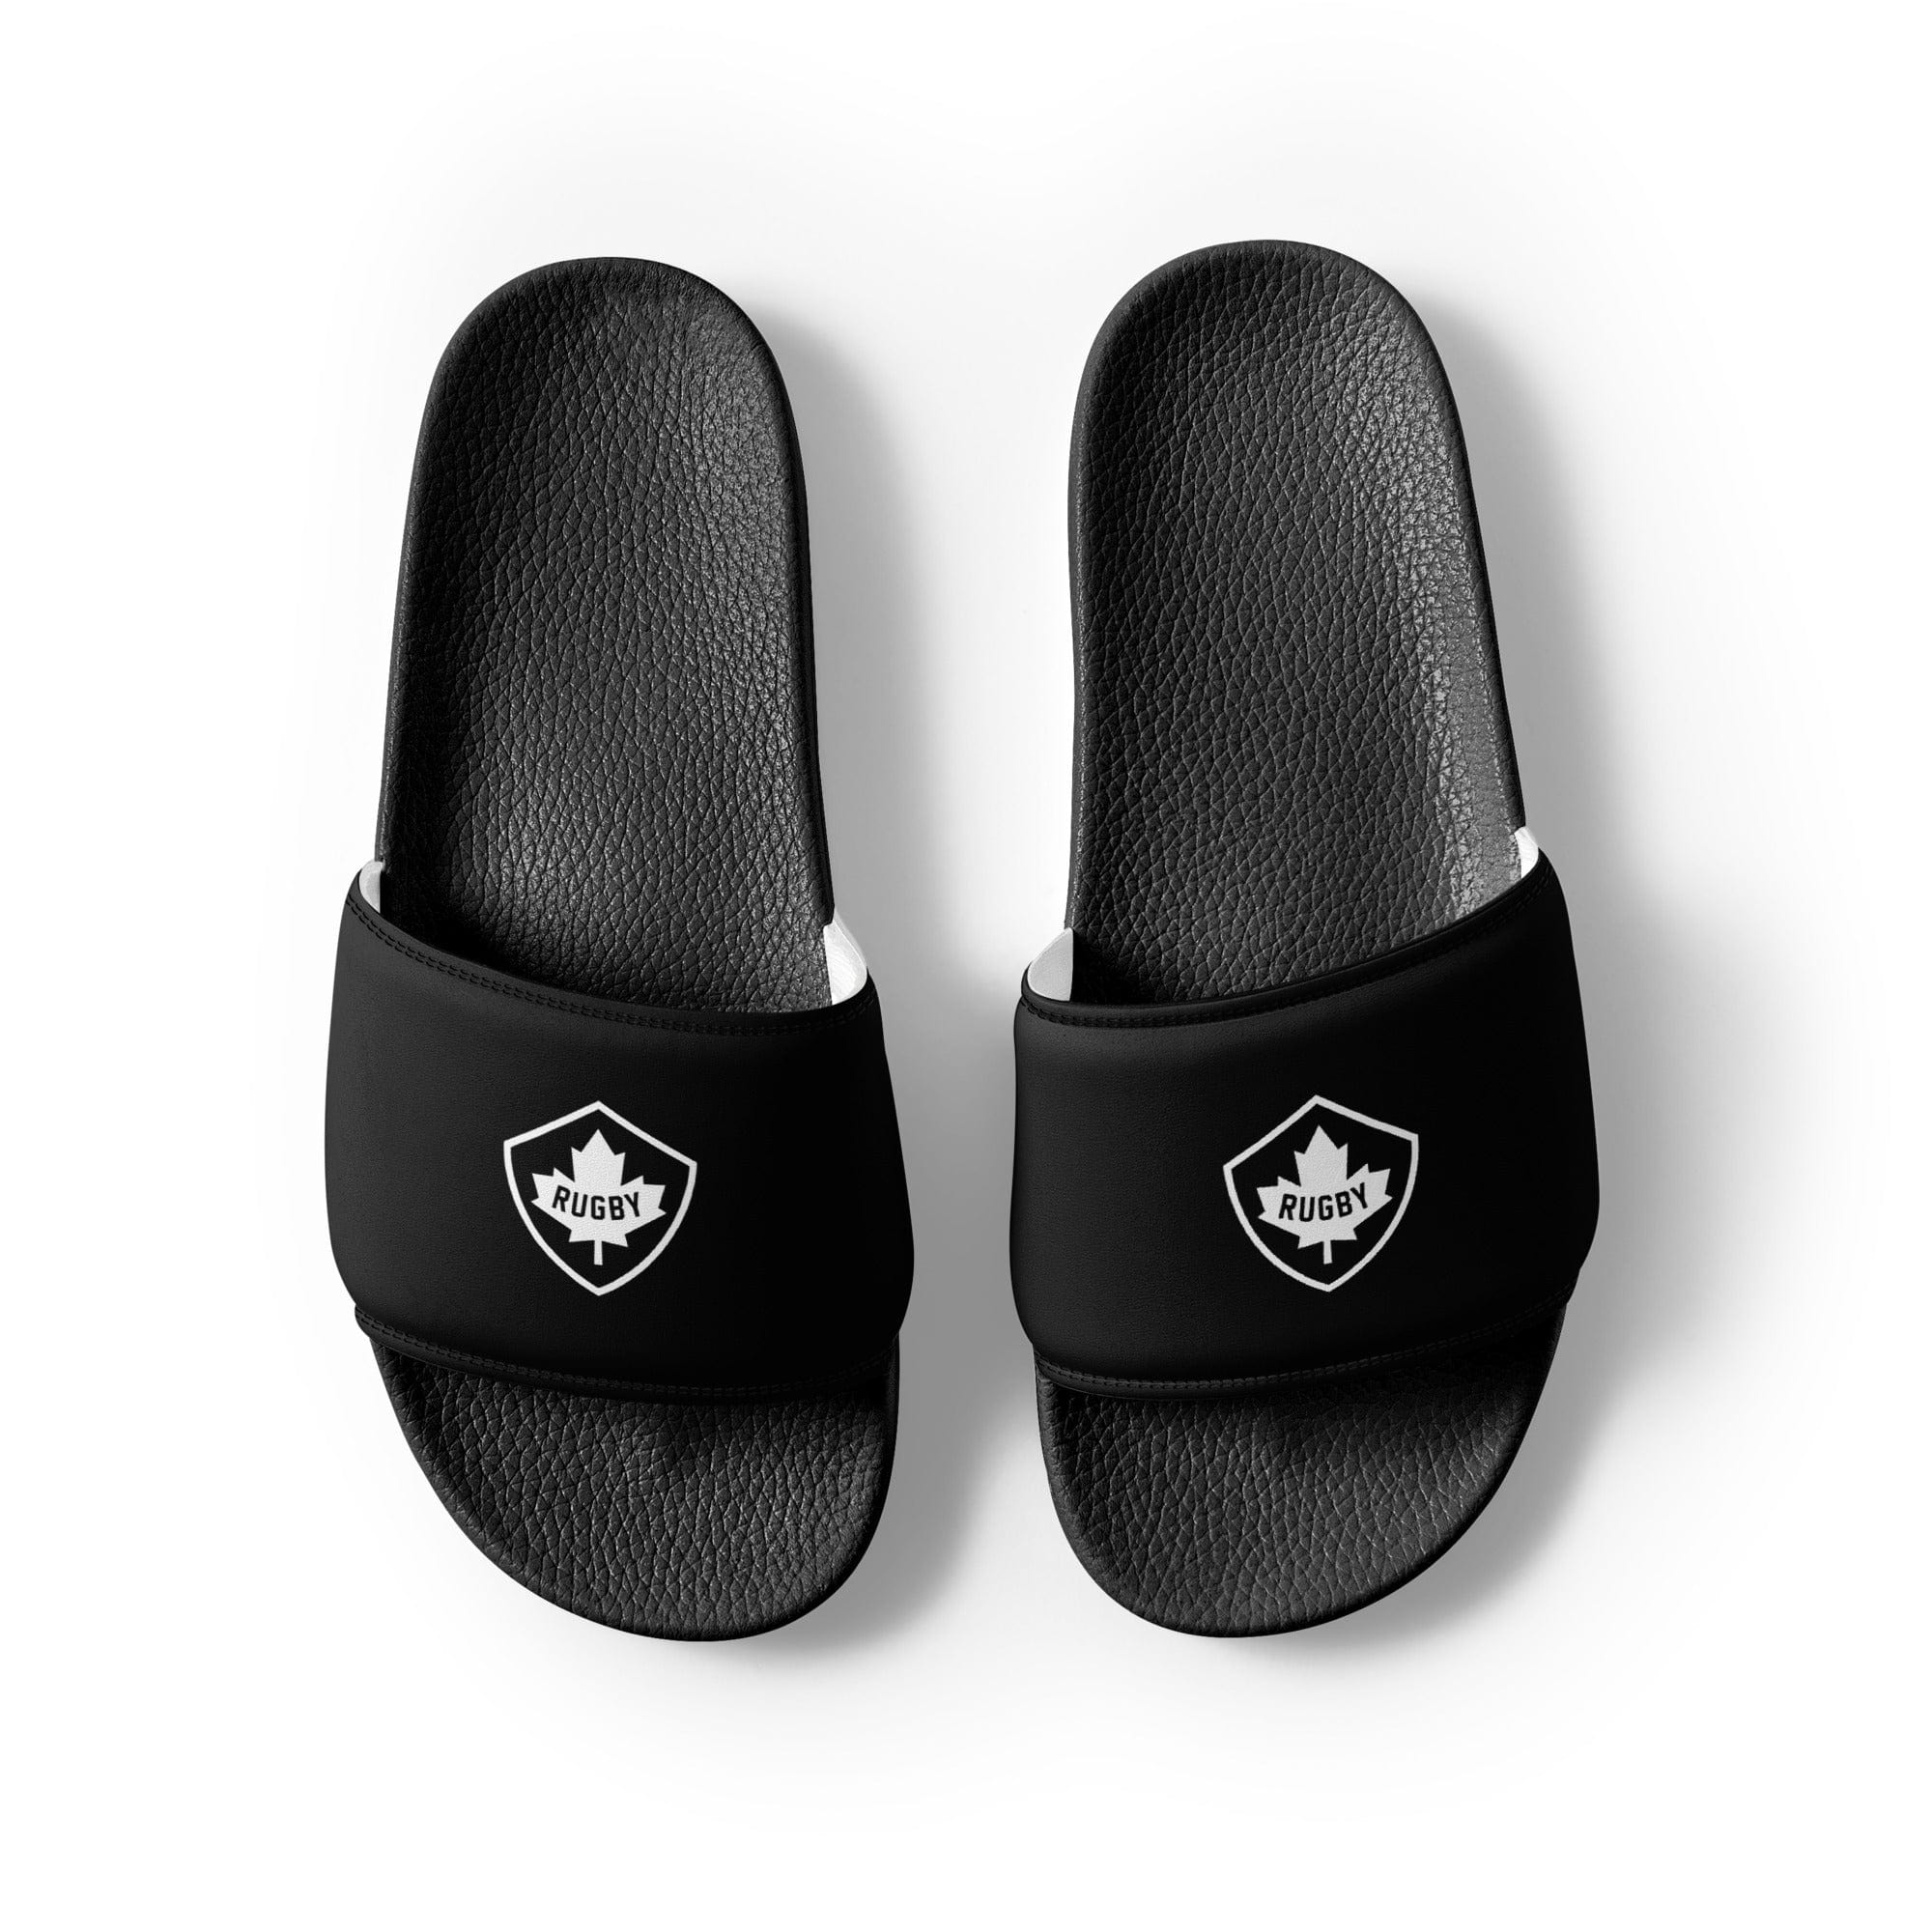 Flip Flop Slippers -  Canada